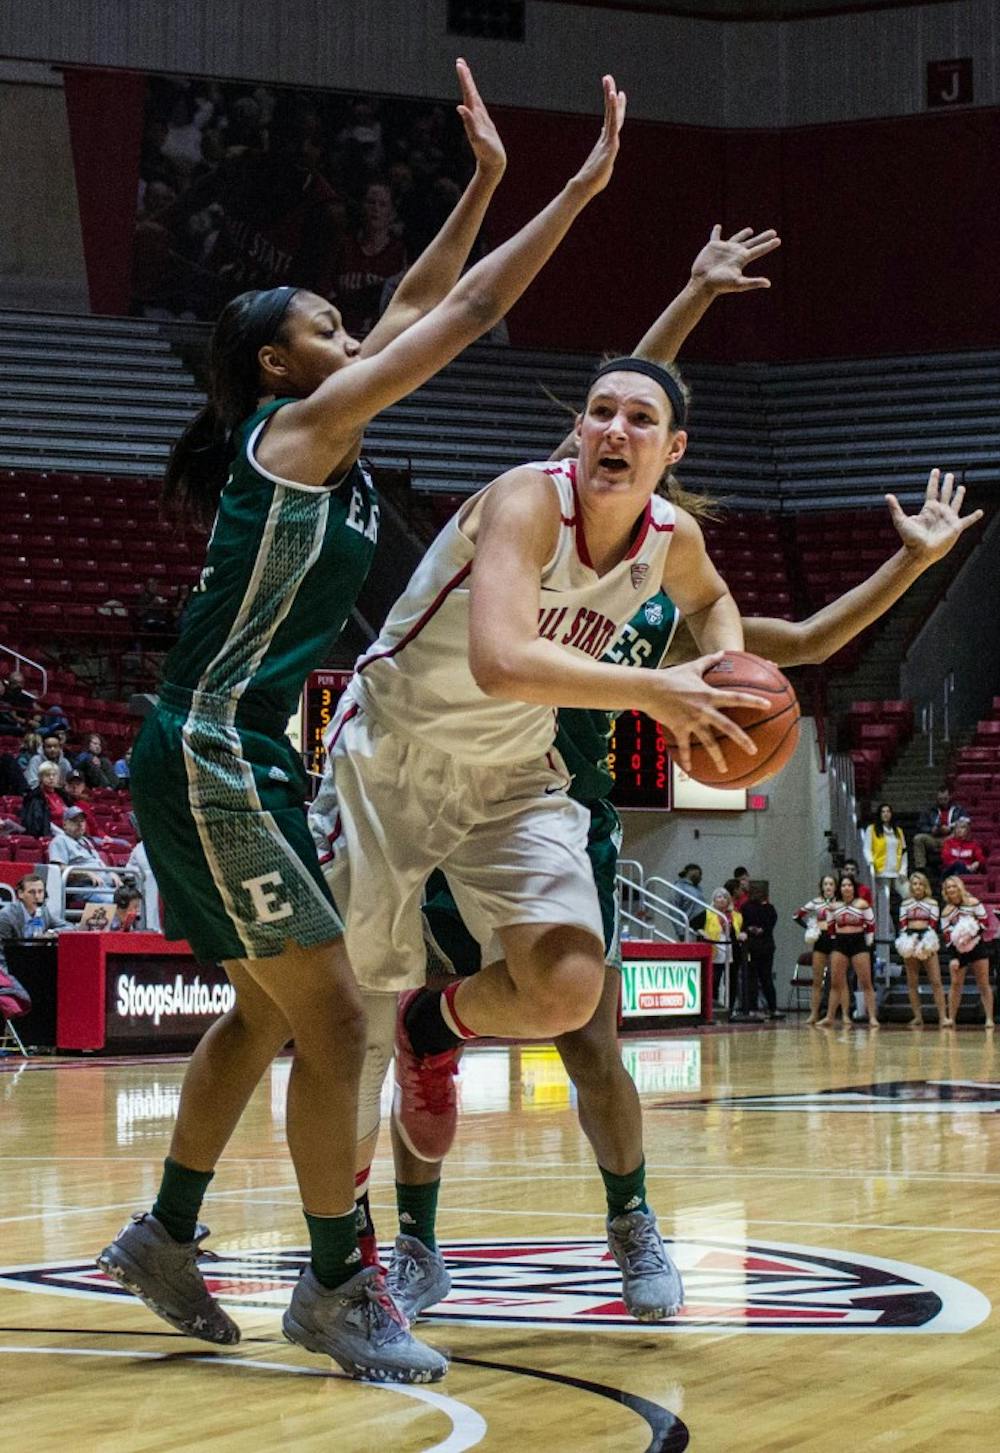 Ball State center Renee Bennett tries to get around two Eastern Michigan players to shoot a layup during the game on Jan. 18 in Worthen Arena. The Cardinals won 78-49. Grace Ramey // DN